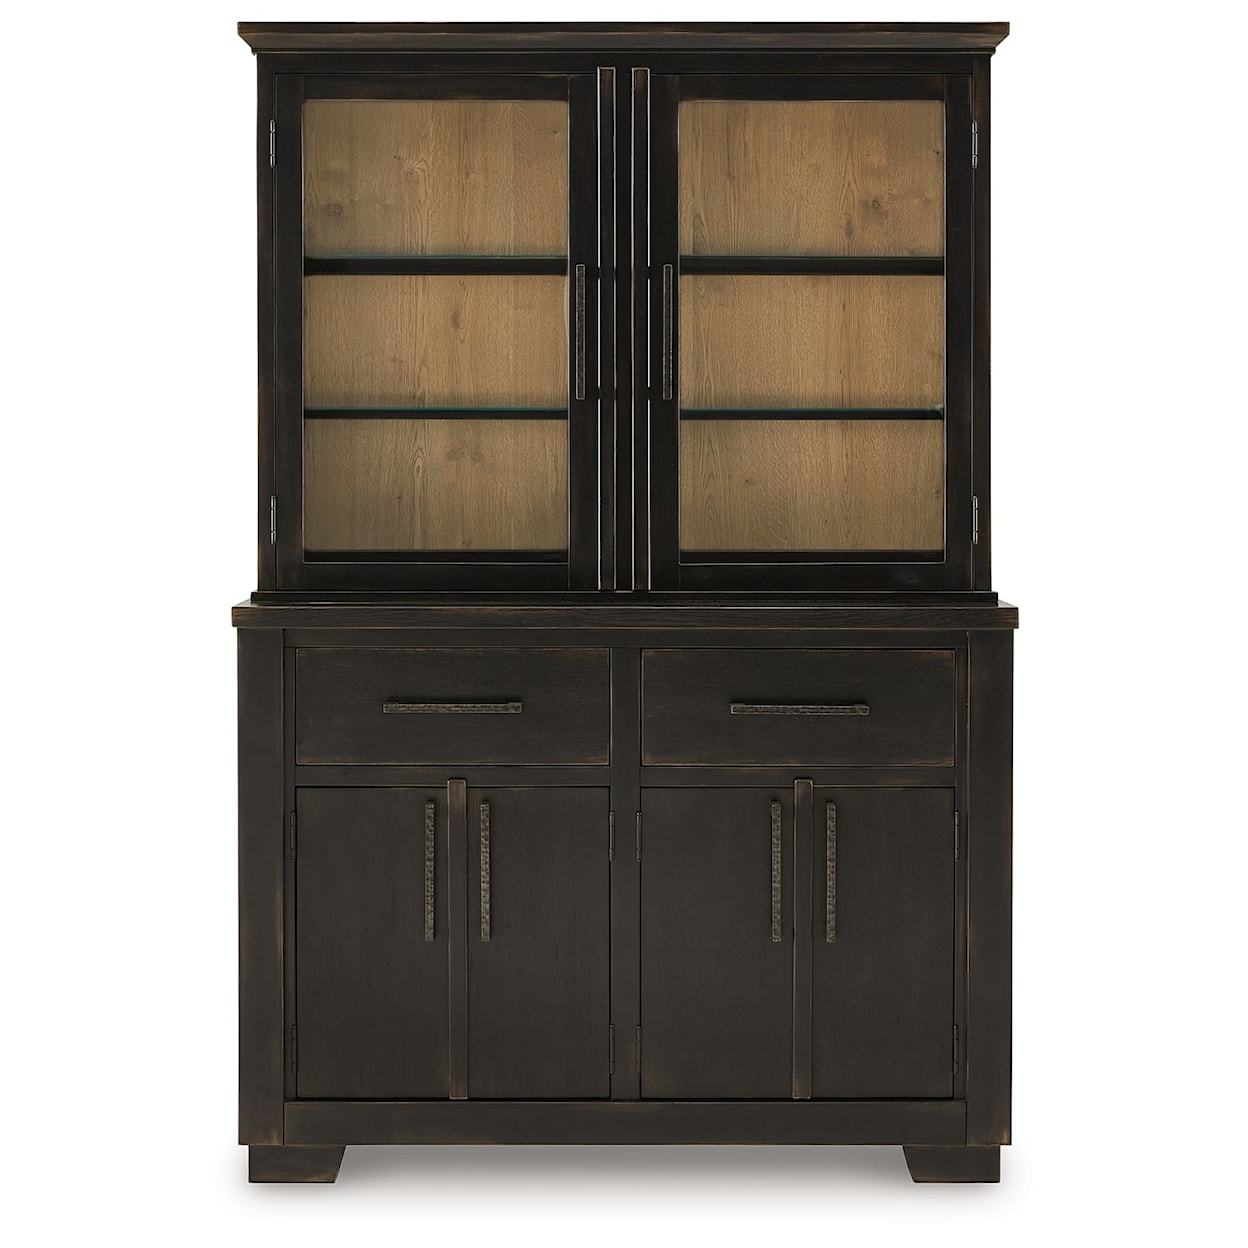 Benchcraft Galliden Dining Buffet and Hutch